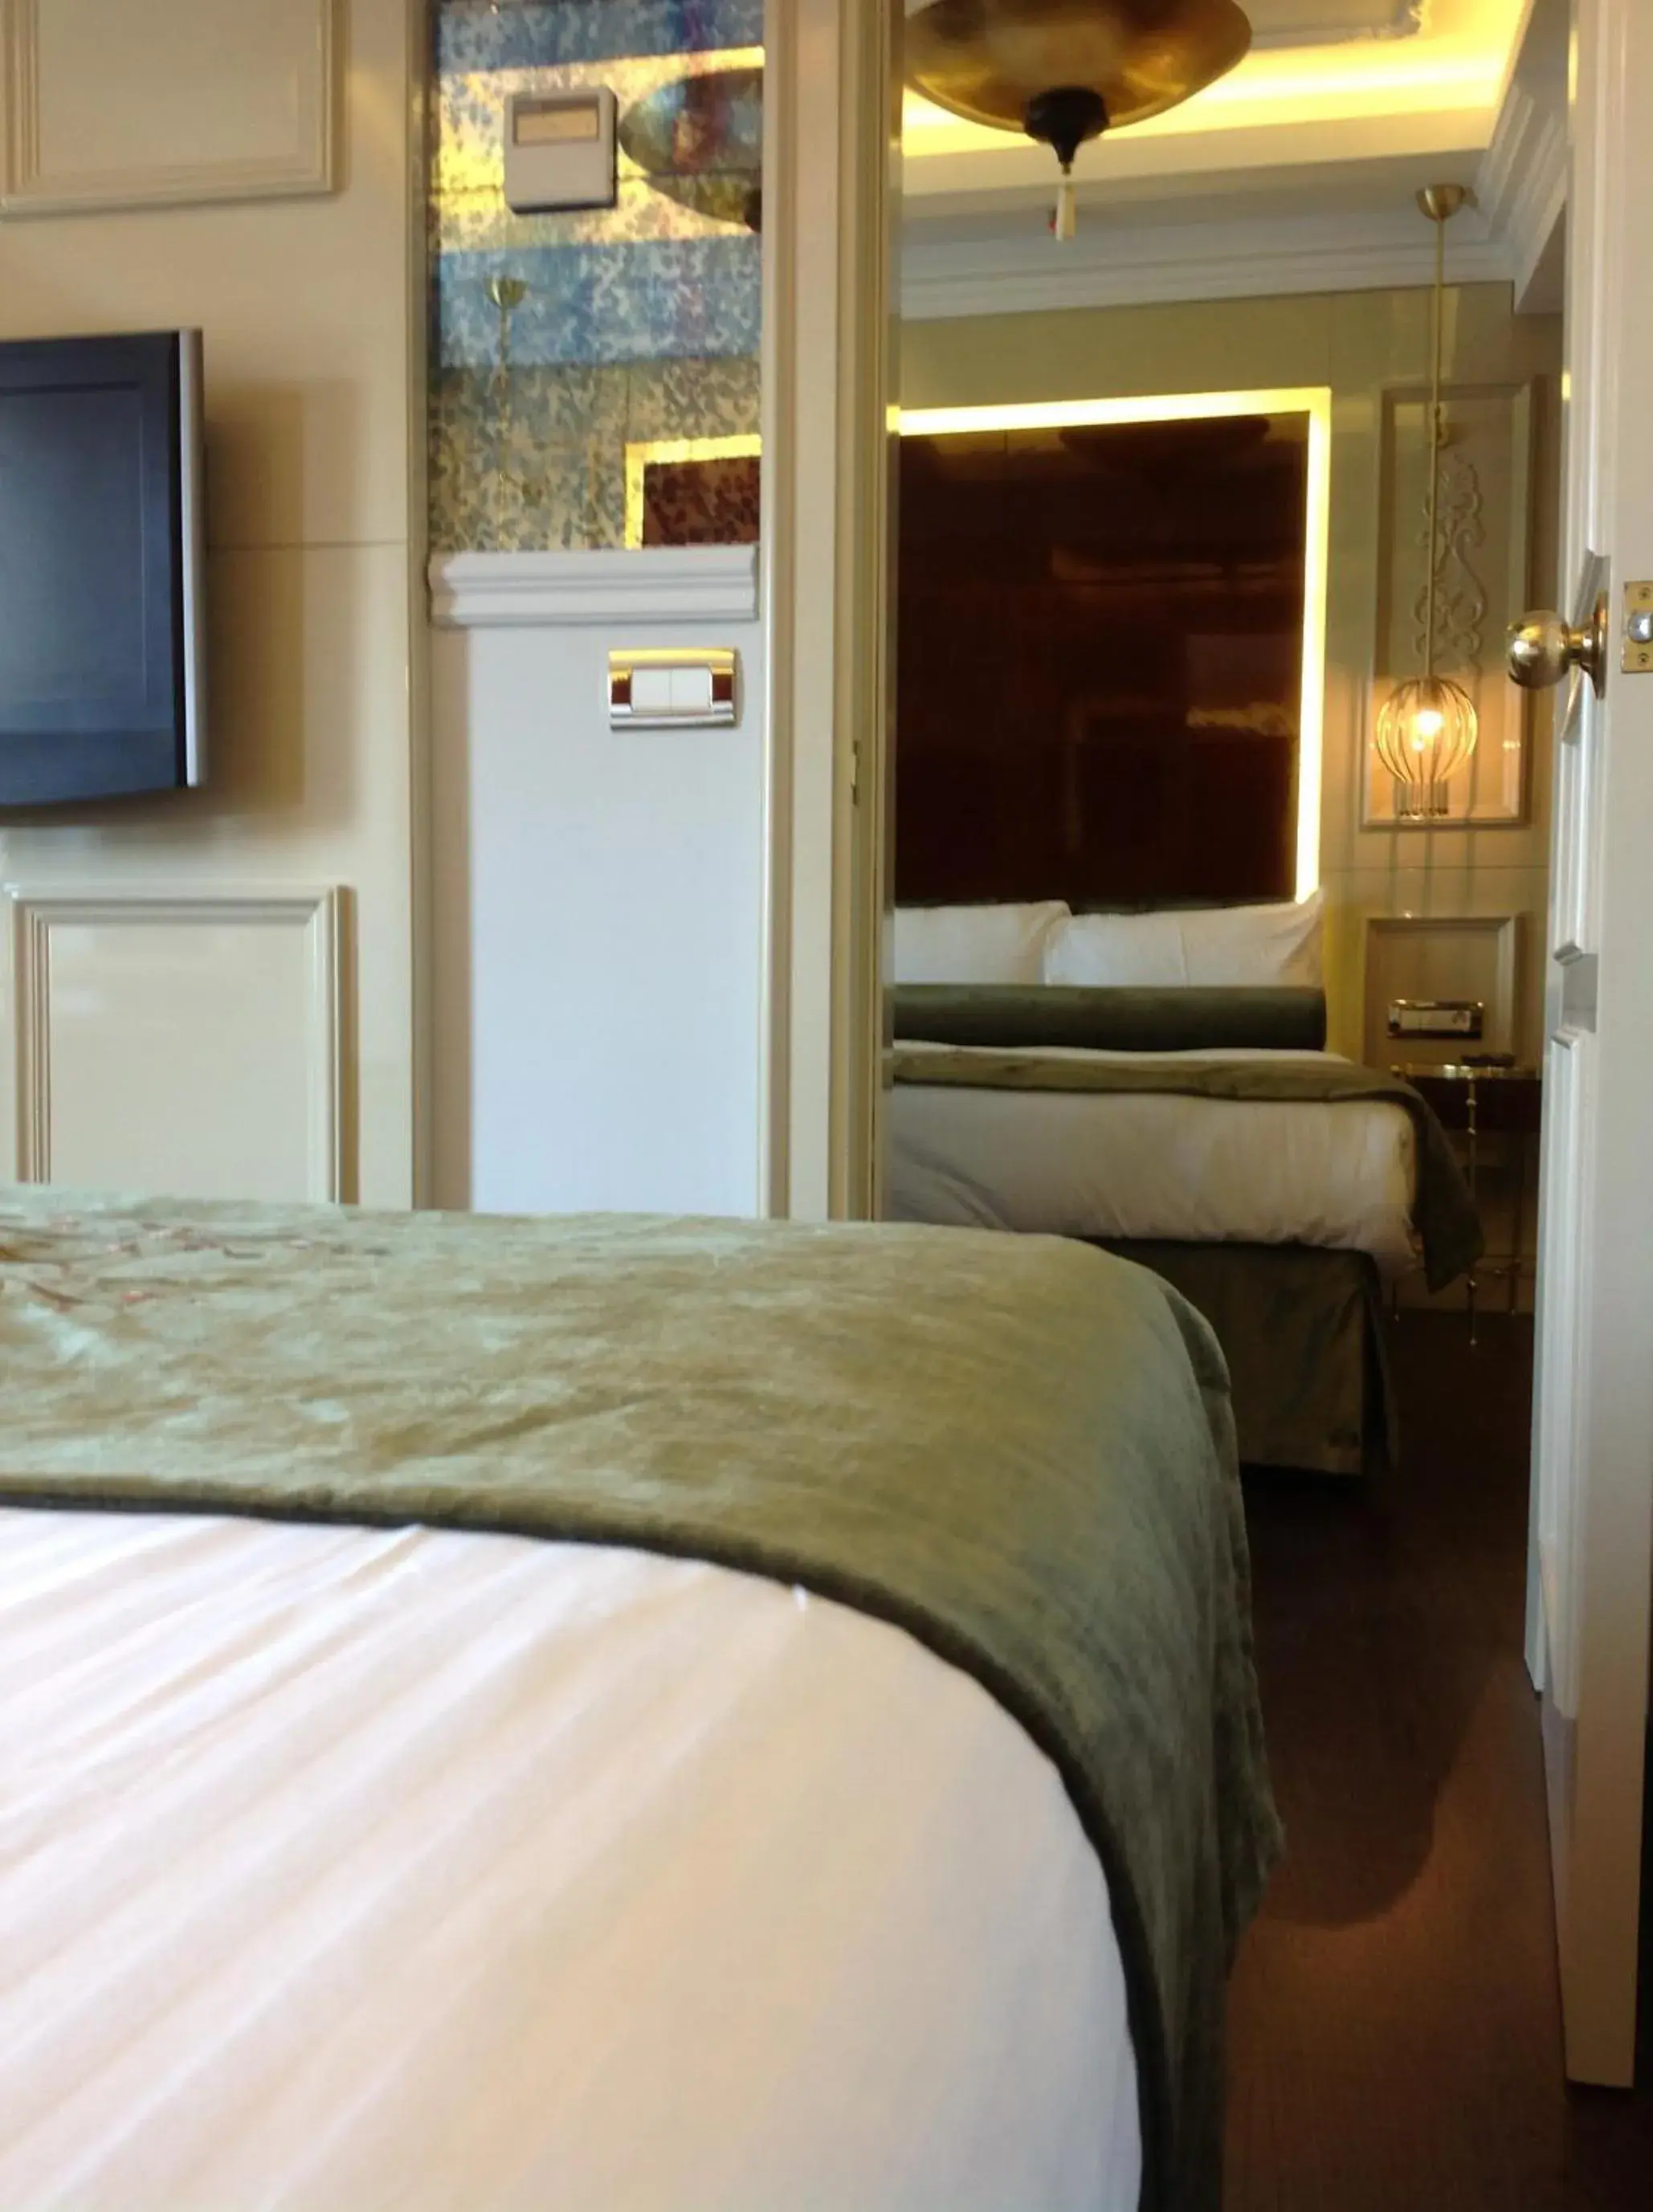 Deluxe Connecting Room in Taksim Star Hotel